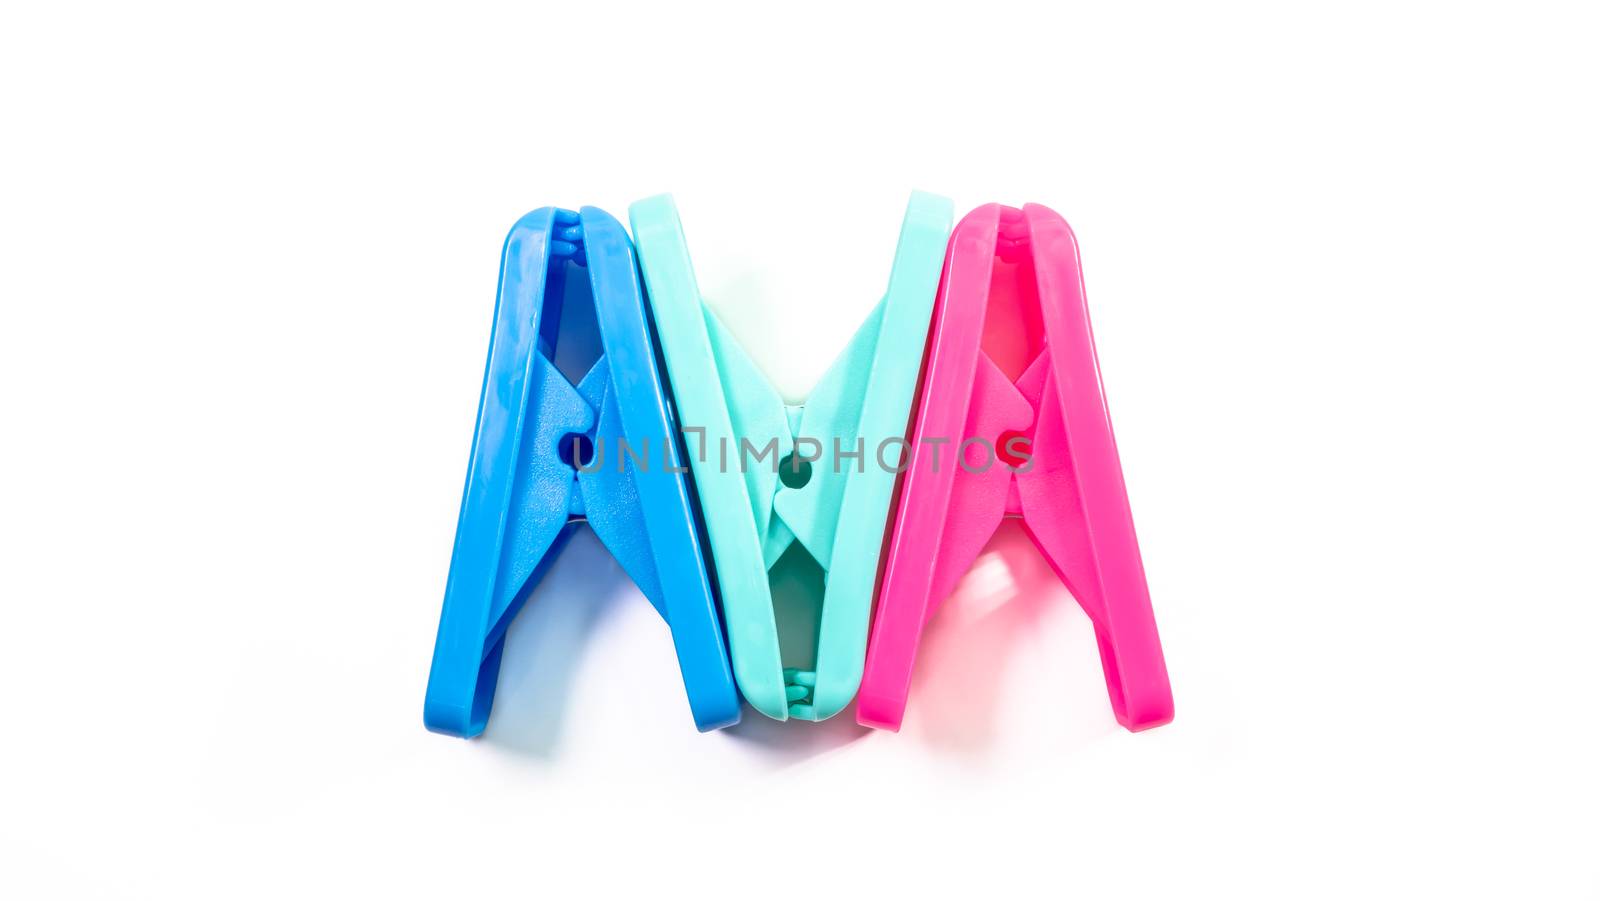 The close up of light green clothes peg and blue clothes peg and pink clothes peg on white background.